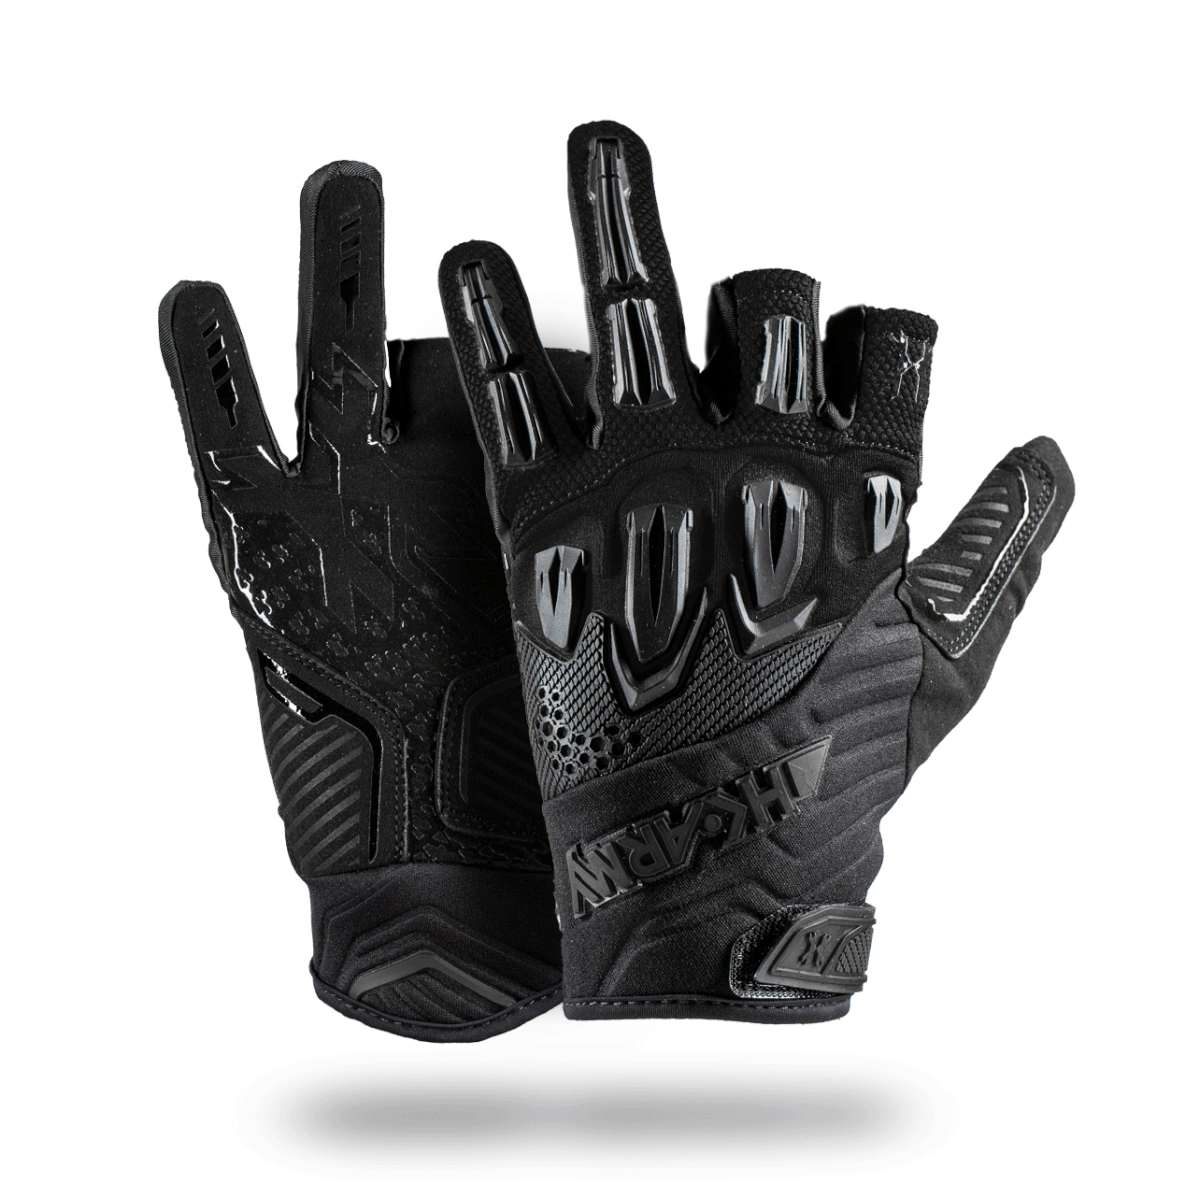 HK Army Hardline "Armored" Glove - Blackout - Small